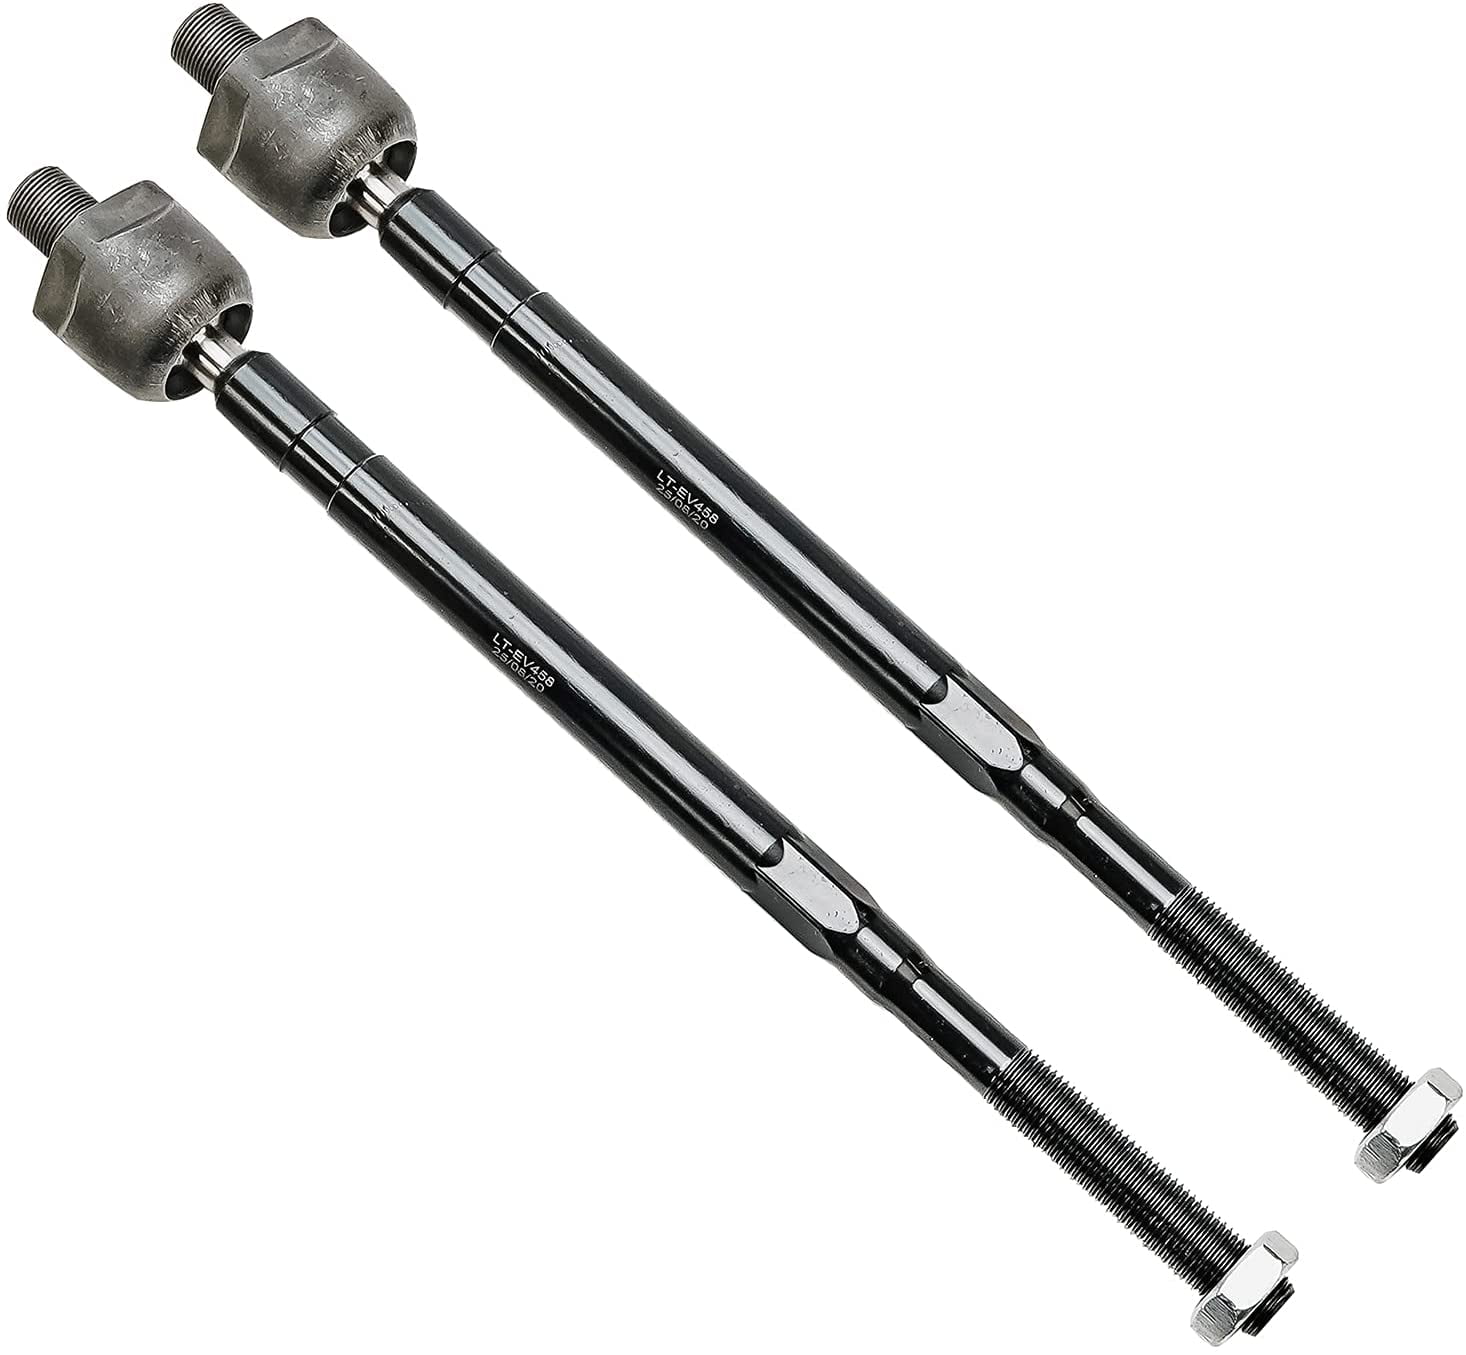 Detroit Axle Replacement for Infiniti i30 i35 Nissan Maxima Front Sway Bar Linnks 8pc Set Inner Outer Tie Rods Ball Joints 